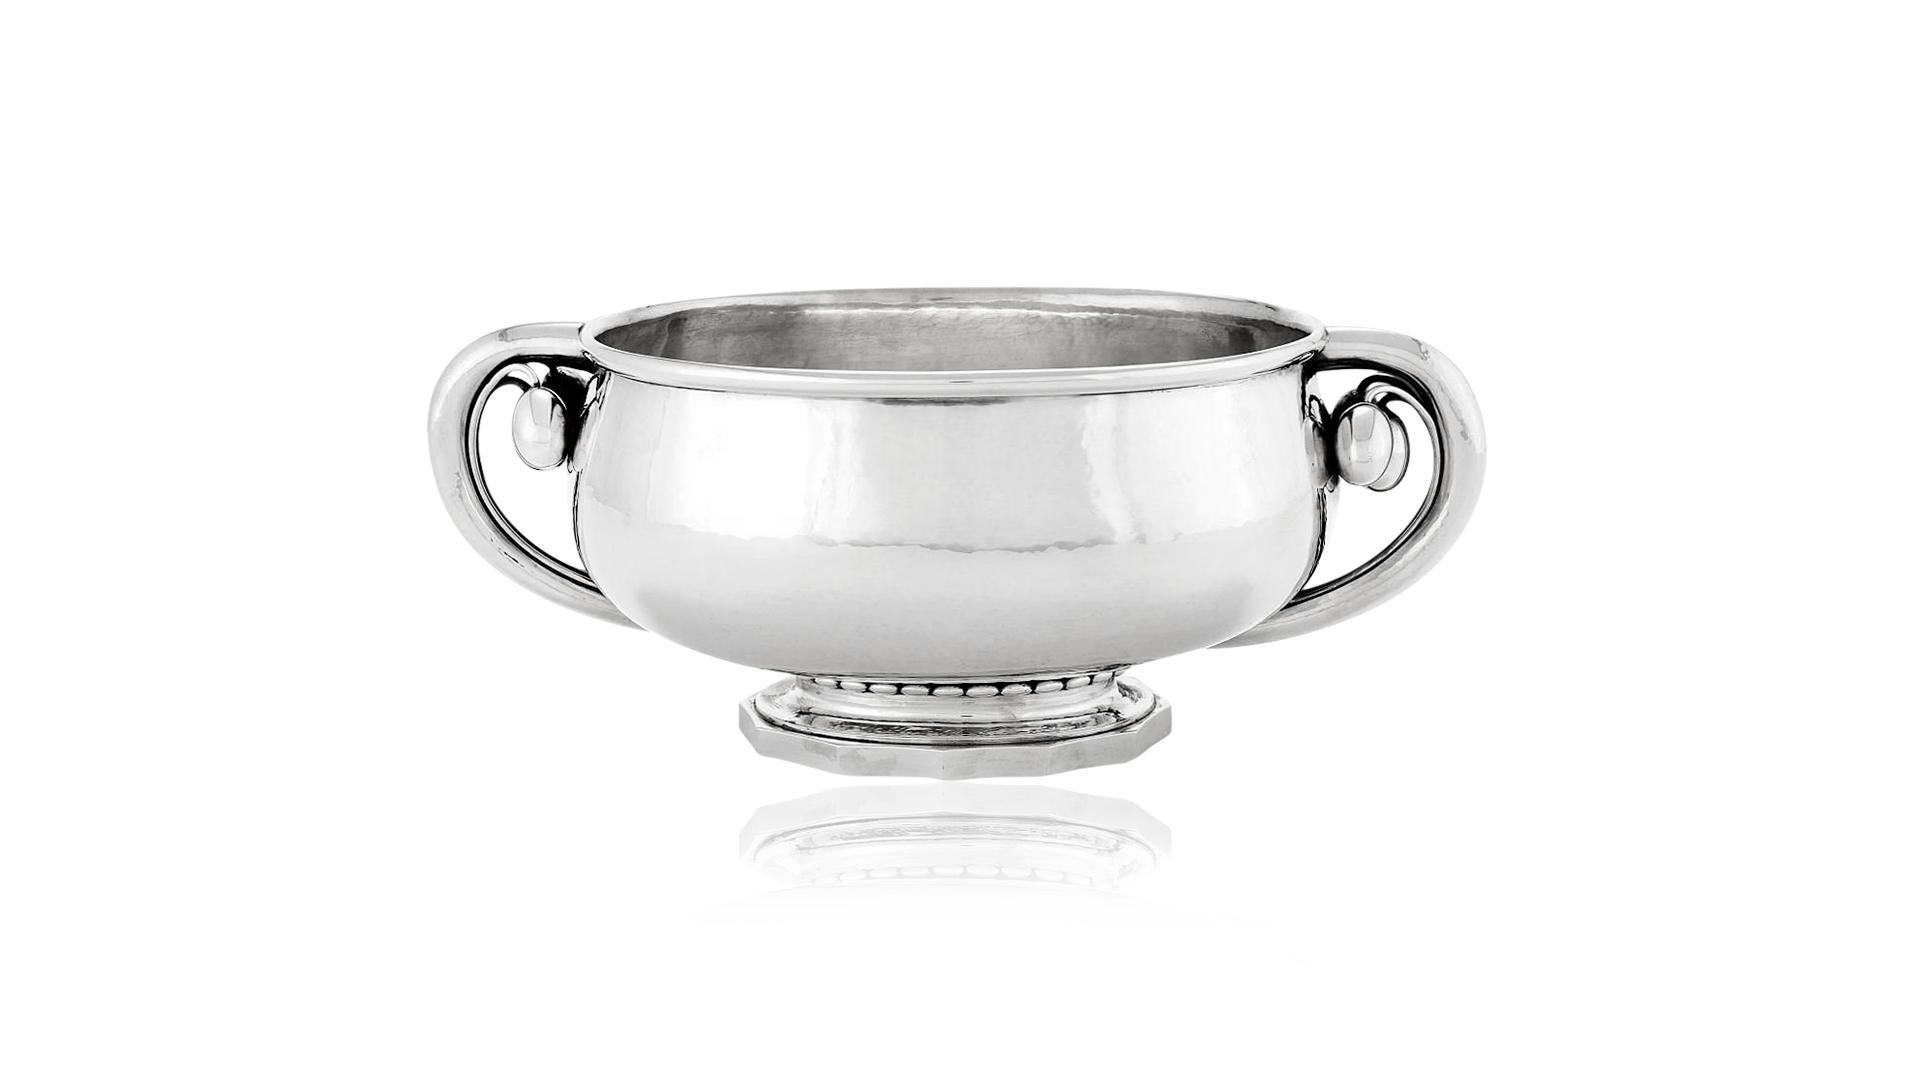 A large and heavy sterling silver Georg Jensen oval “Cherry” centerpiece bowl. This is one of Georg Jensen’s later designs, from a brief period in 1925-1926 when he lived in Paris. The bowl is a heavy thick oval shape that bulges out at the side and